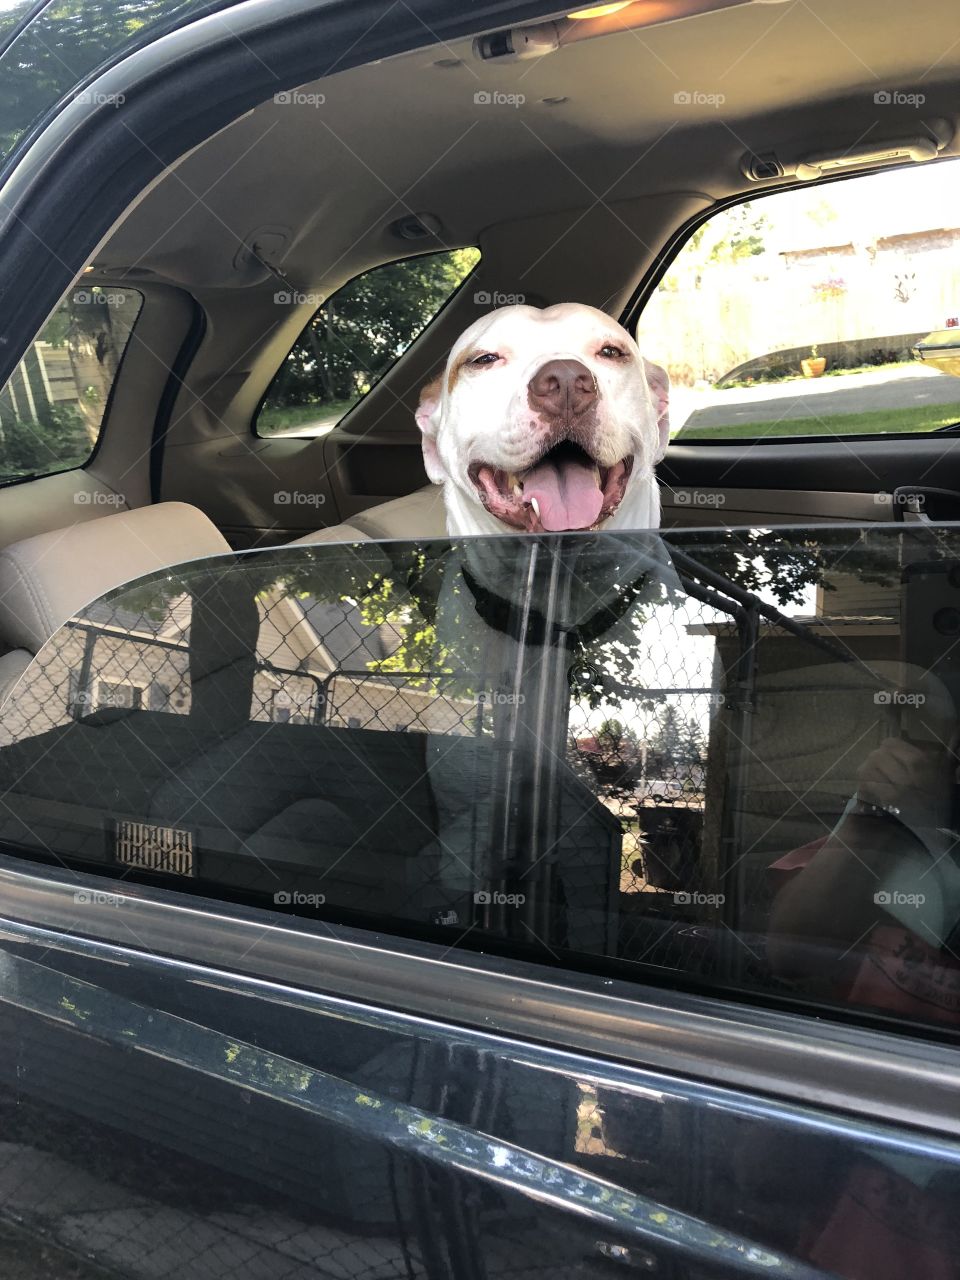 Zeus my pit bull riding in the car.